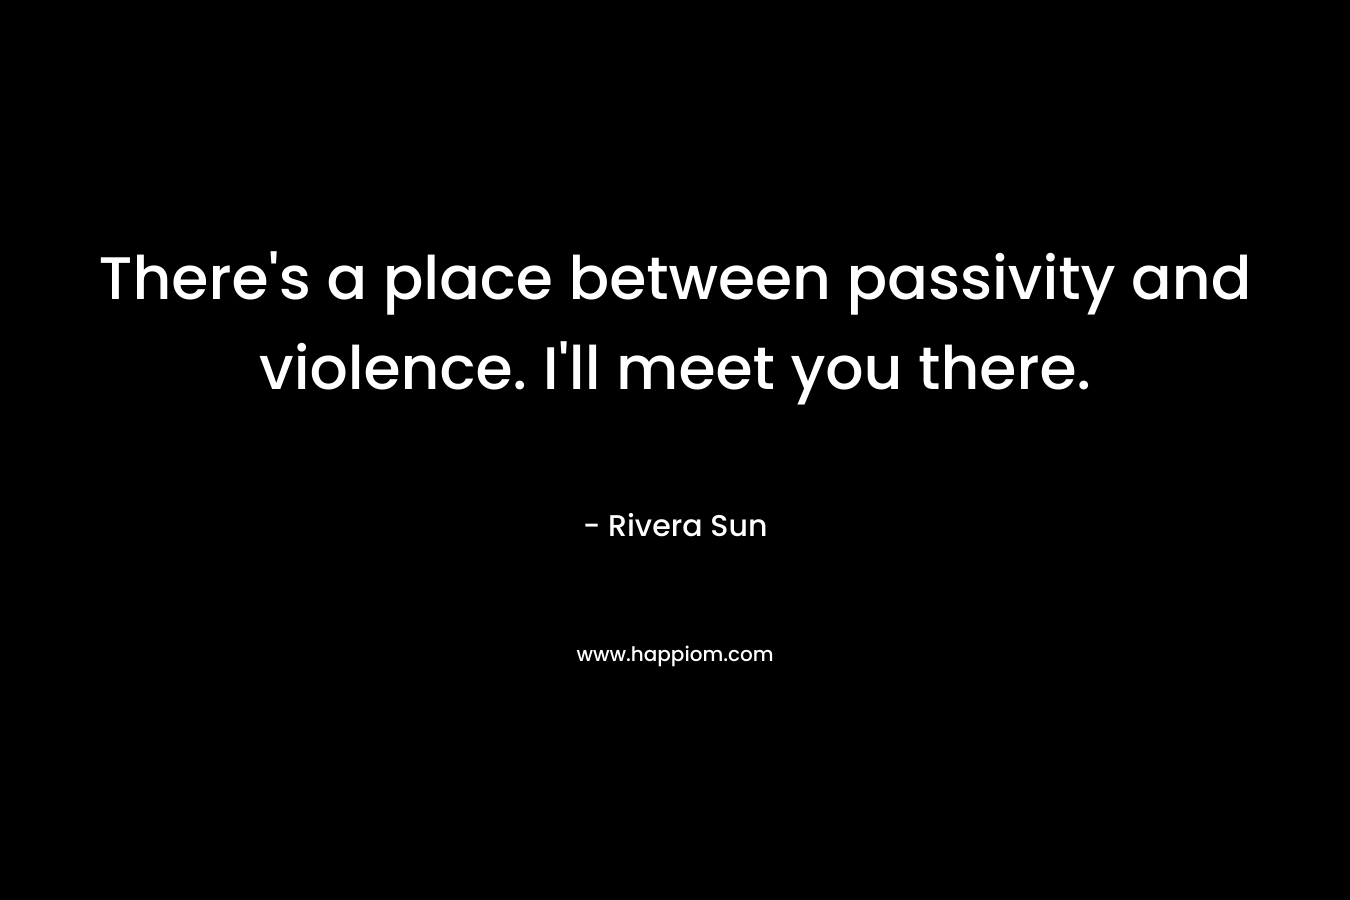 There’s a place between passivity and violence. I’ll meet you there. – Rivera Sun